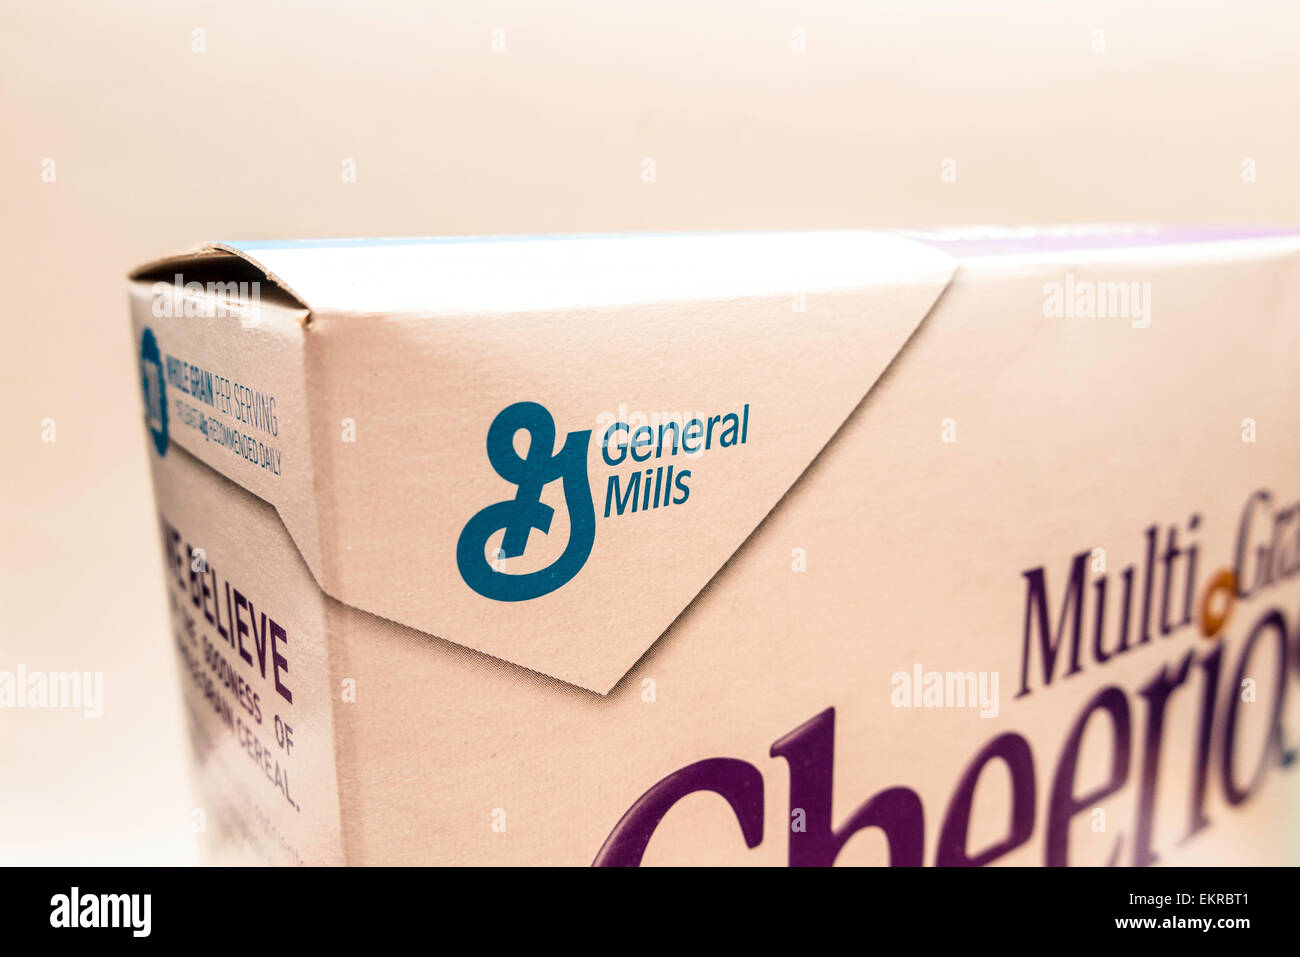 A Box Of Whole Grain Cheerios And The General Mills Logo General